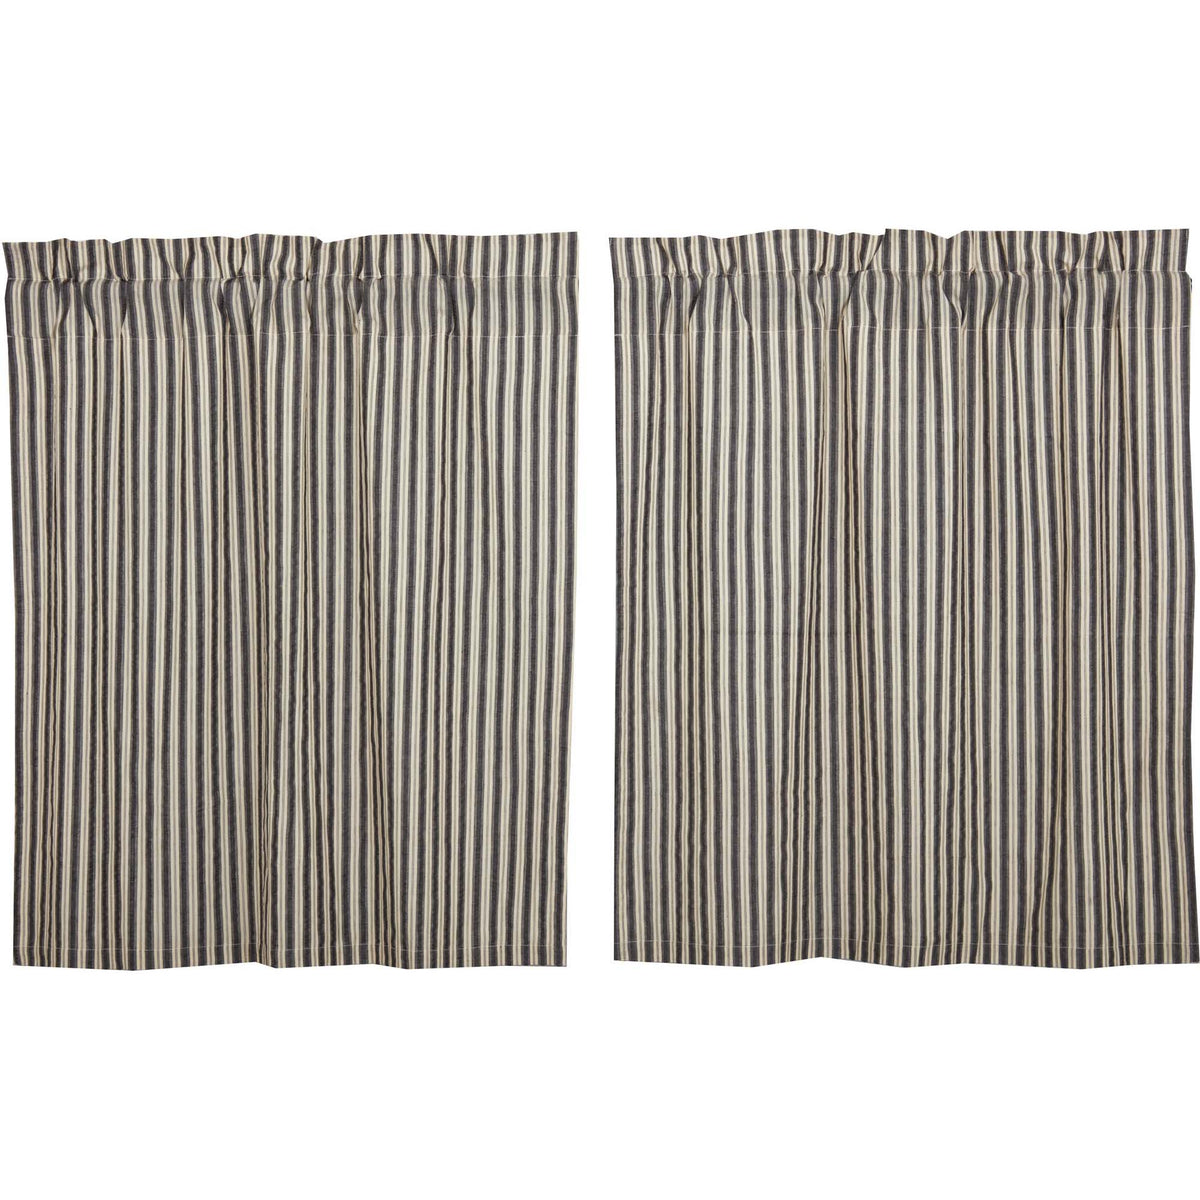 April & Olive Ashmont Ticking Stripe Tier Set of 2 L36xW36 By VHC Brands